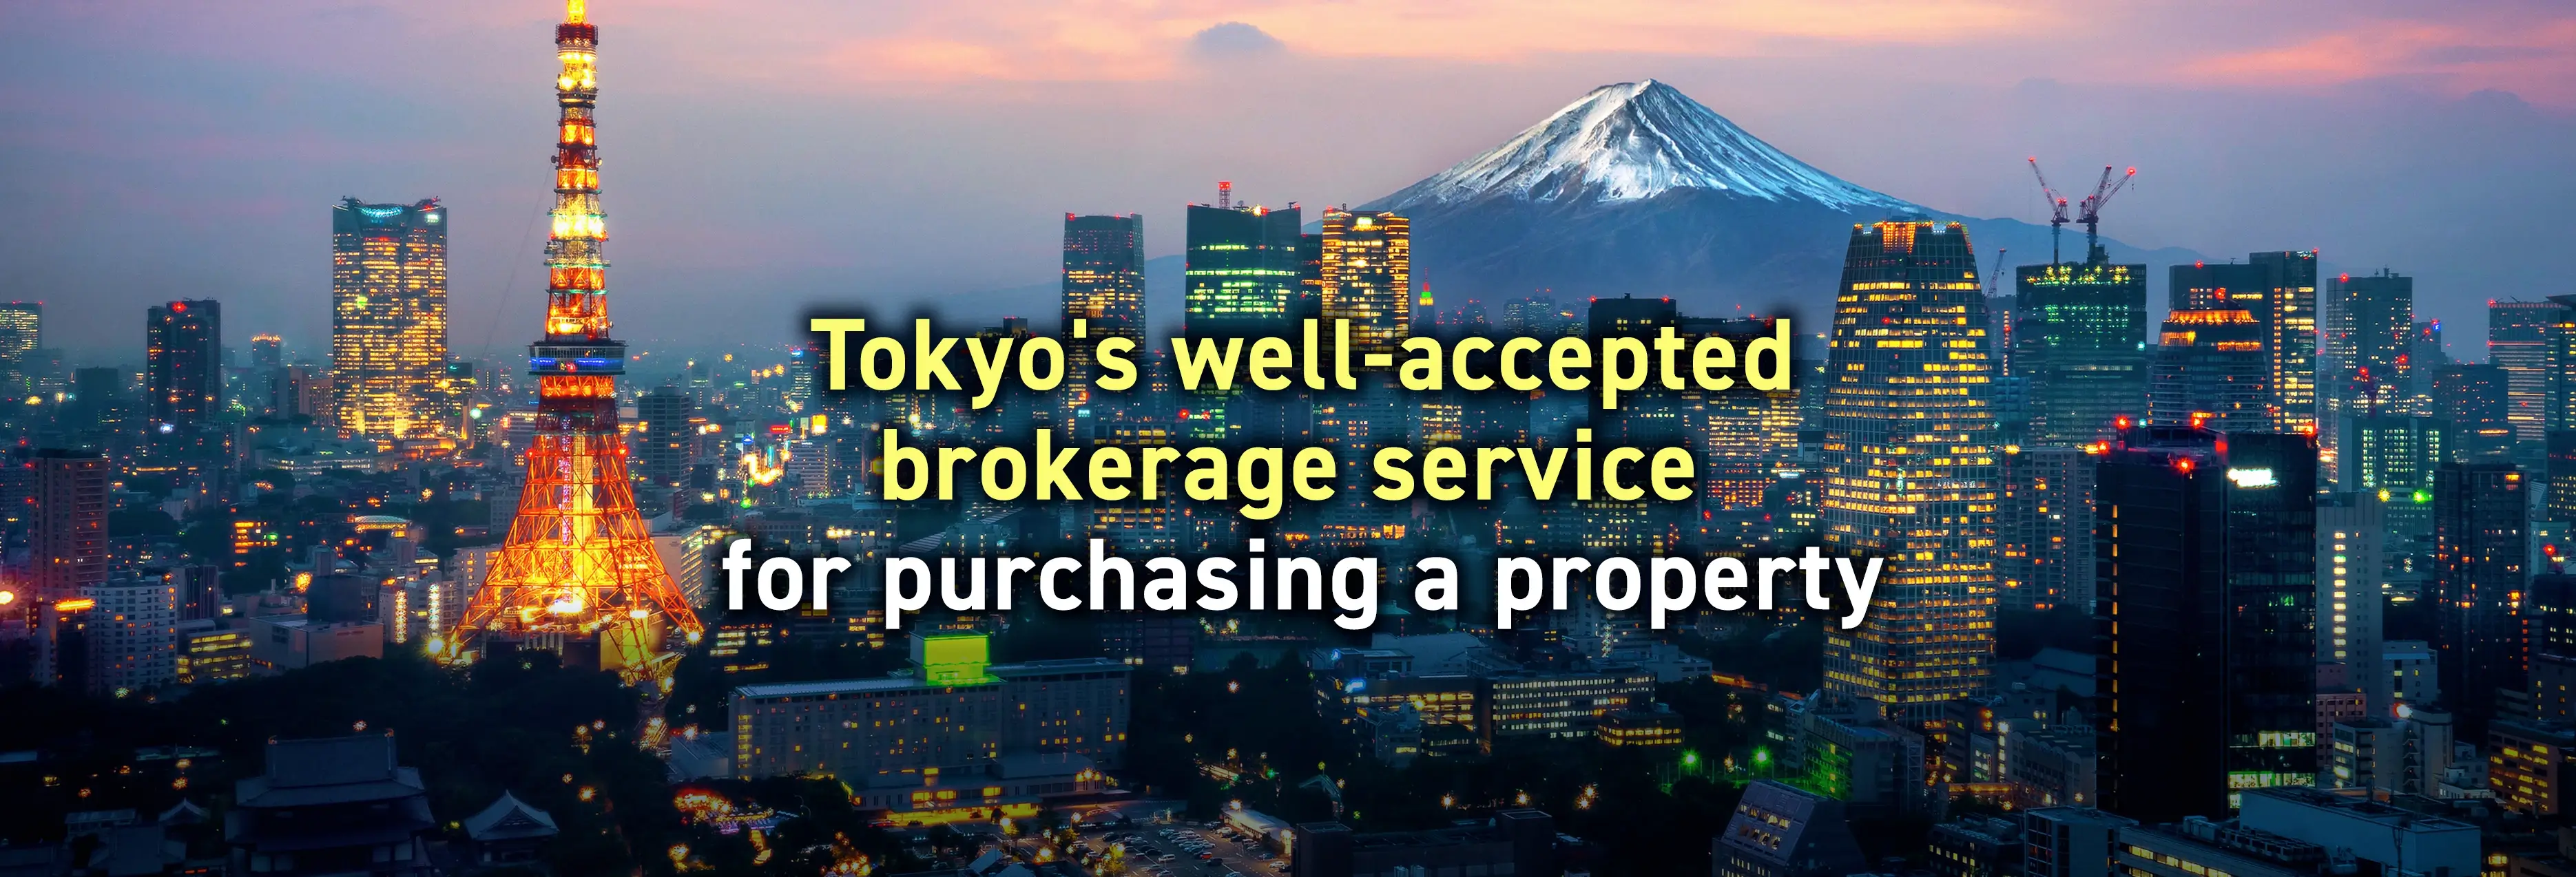 Tokyo's well-accepted brokerage service for purchasing a property